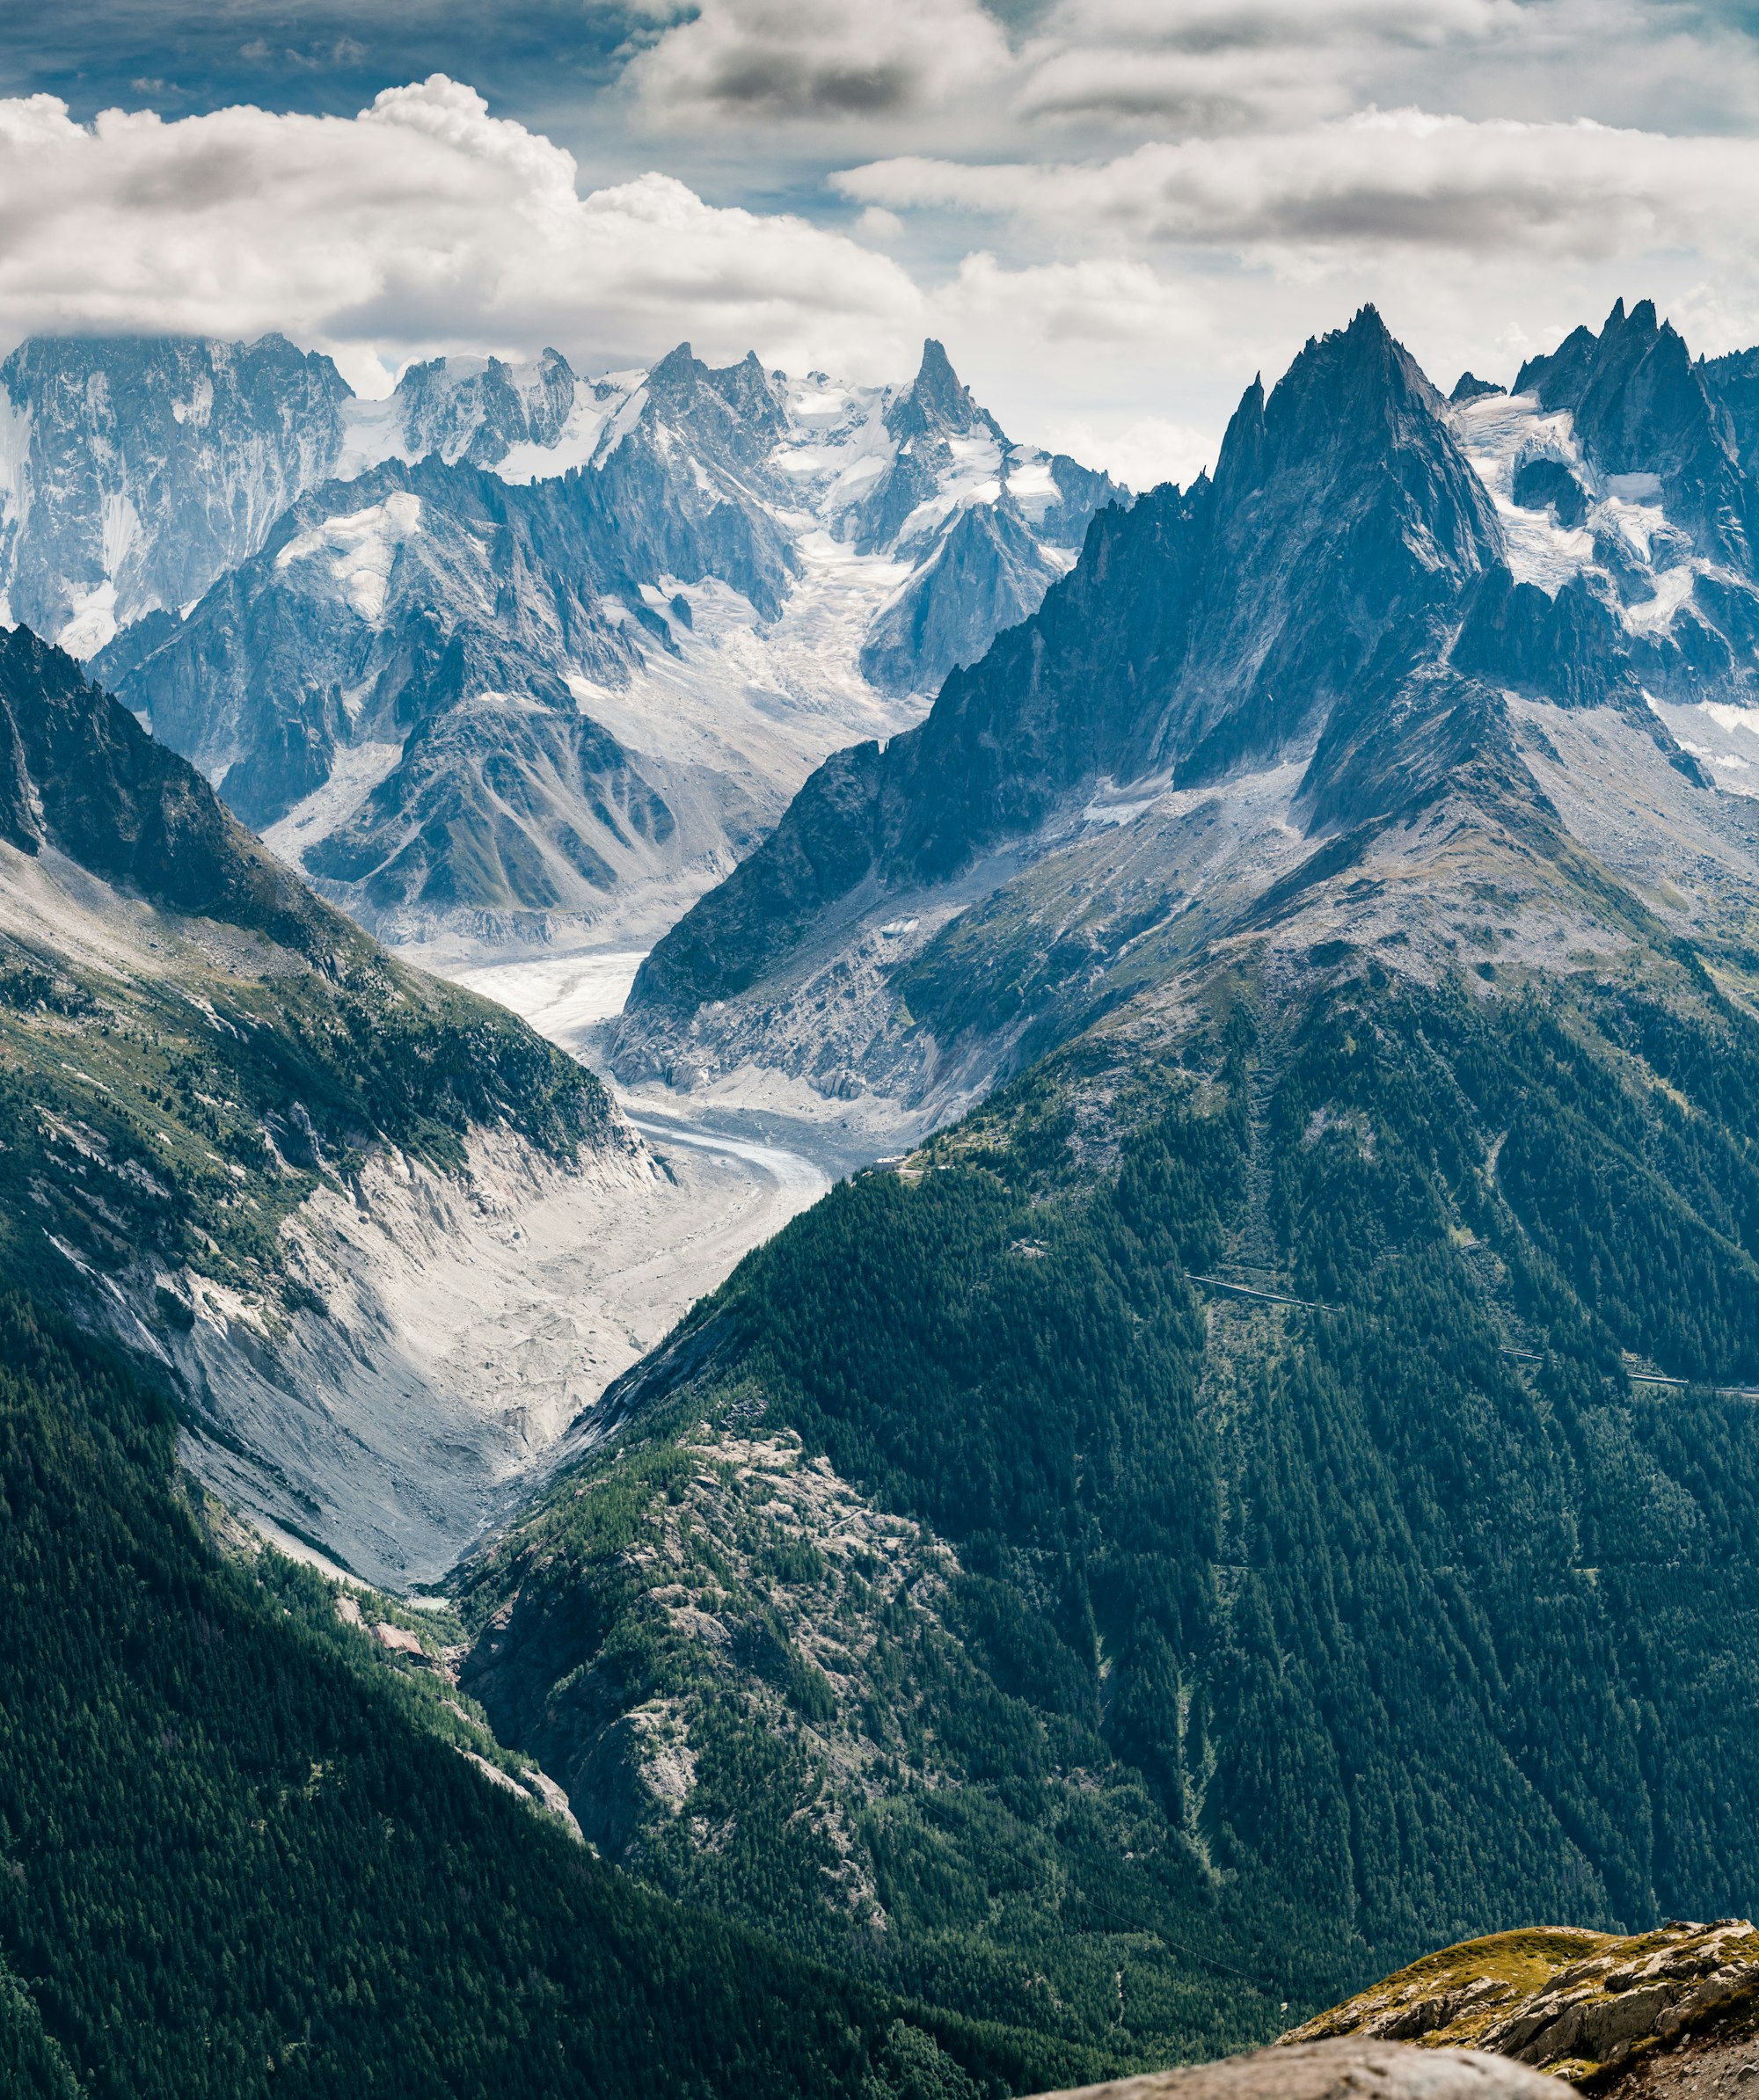 Hiking to Lac Blanc gives the best views across to the major peaks close to Mont Blanc. This panorama picture was made in July.